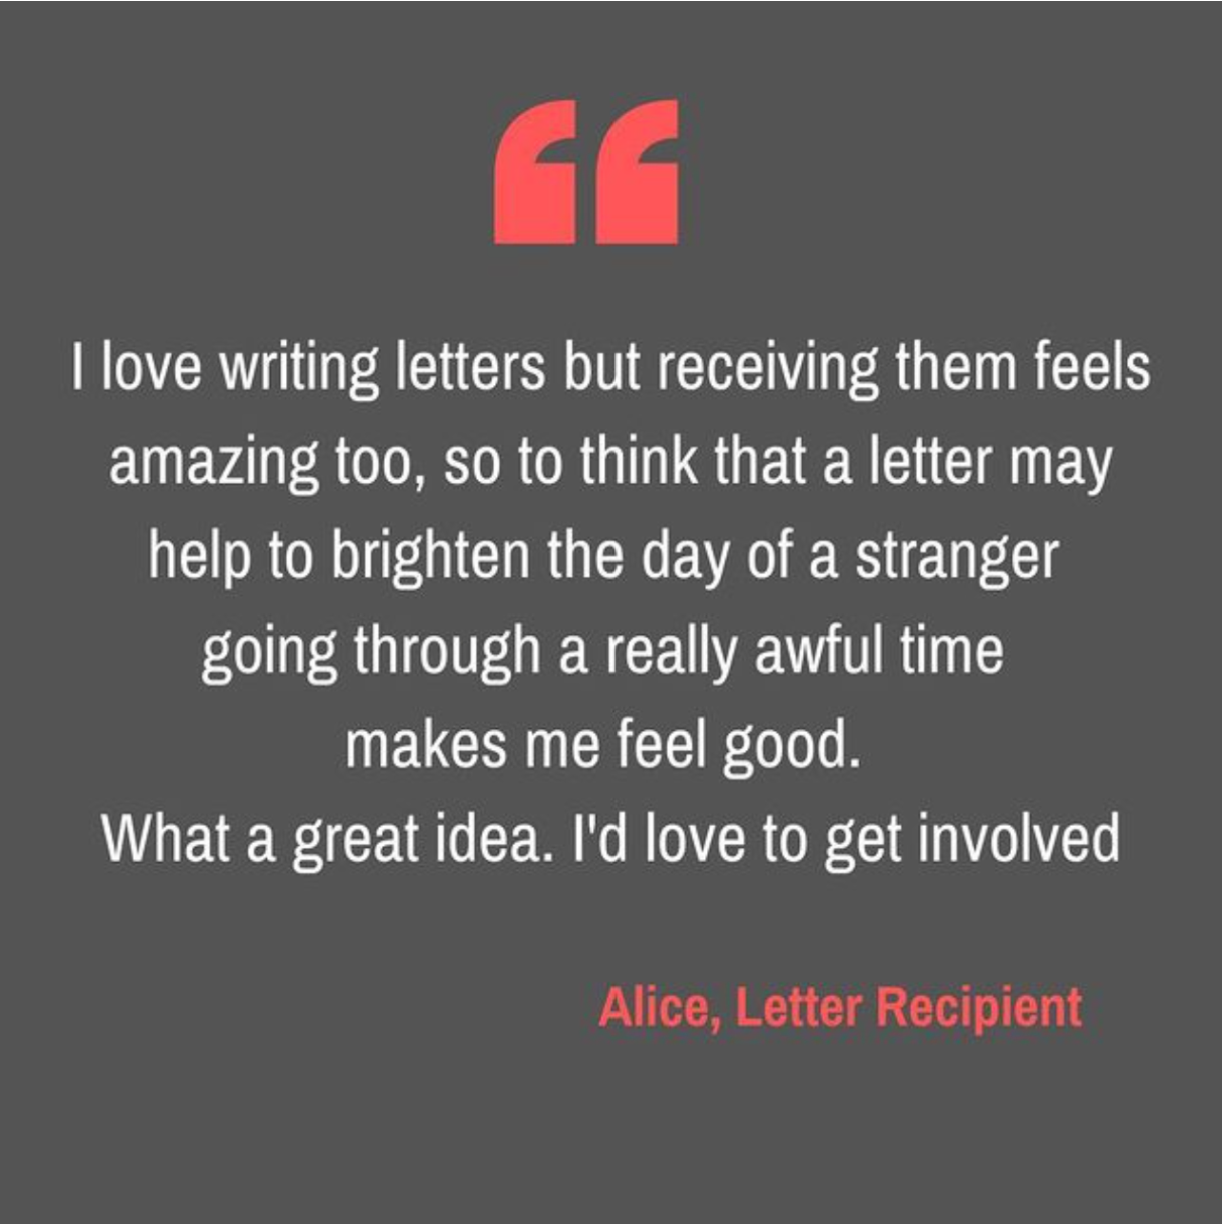 Alice - Letter Recipient - Quote Image.png